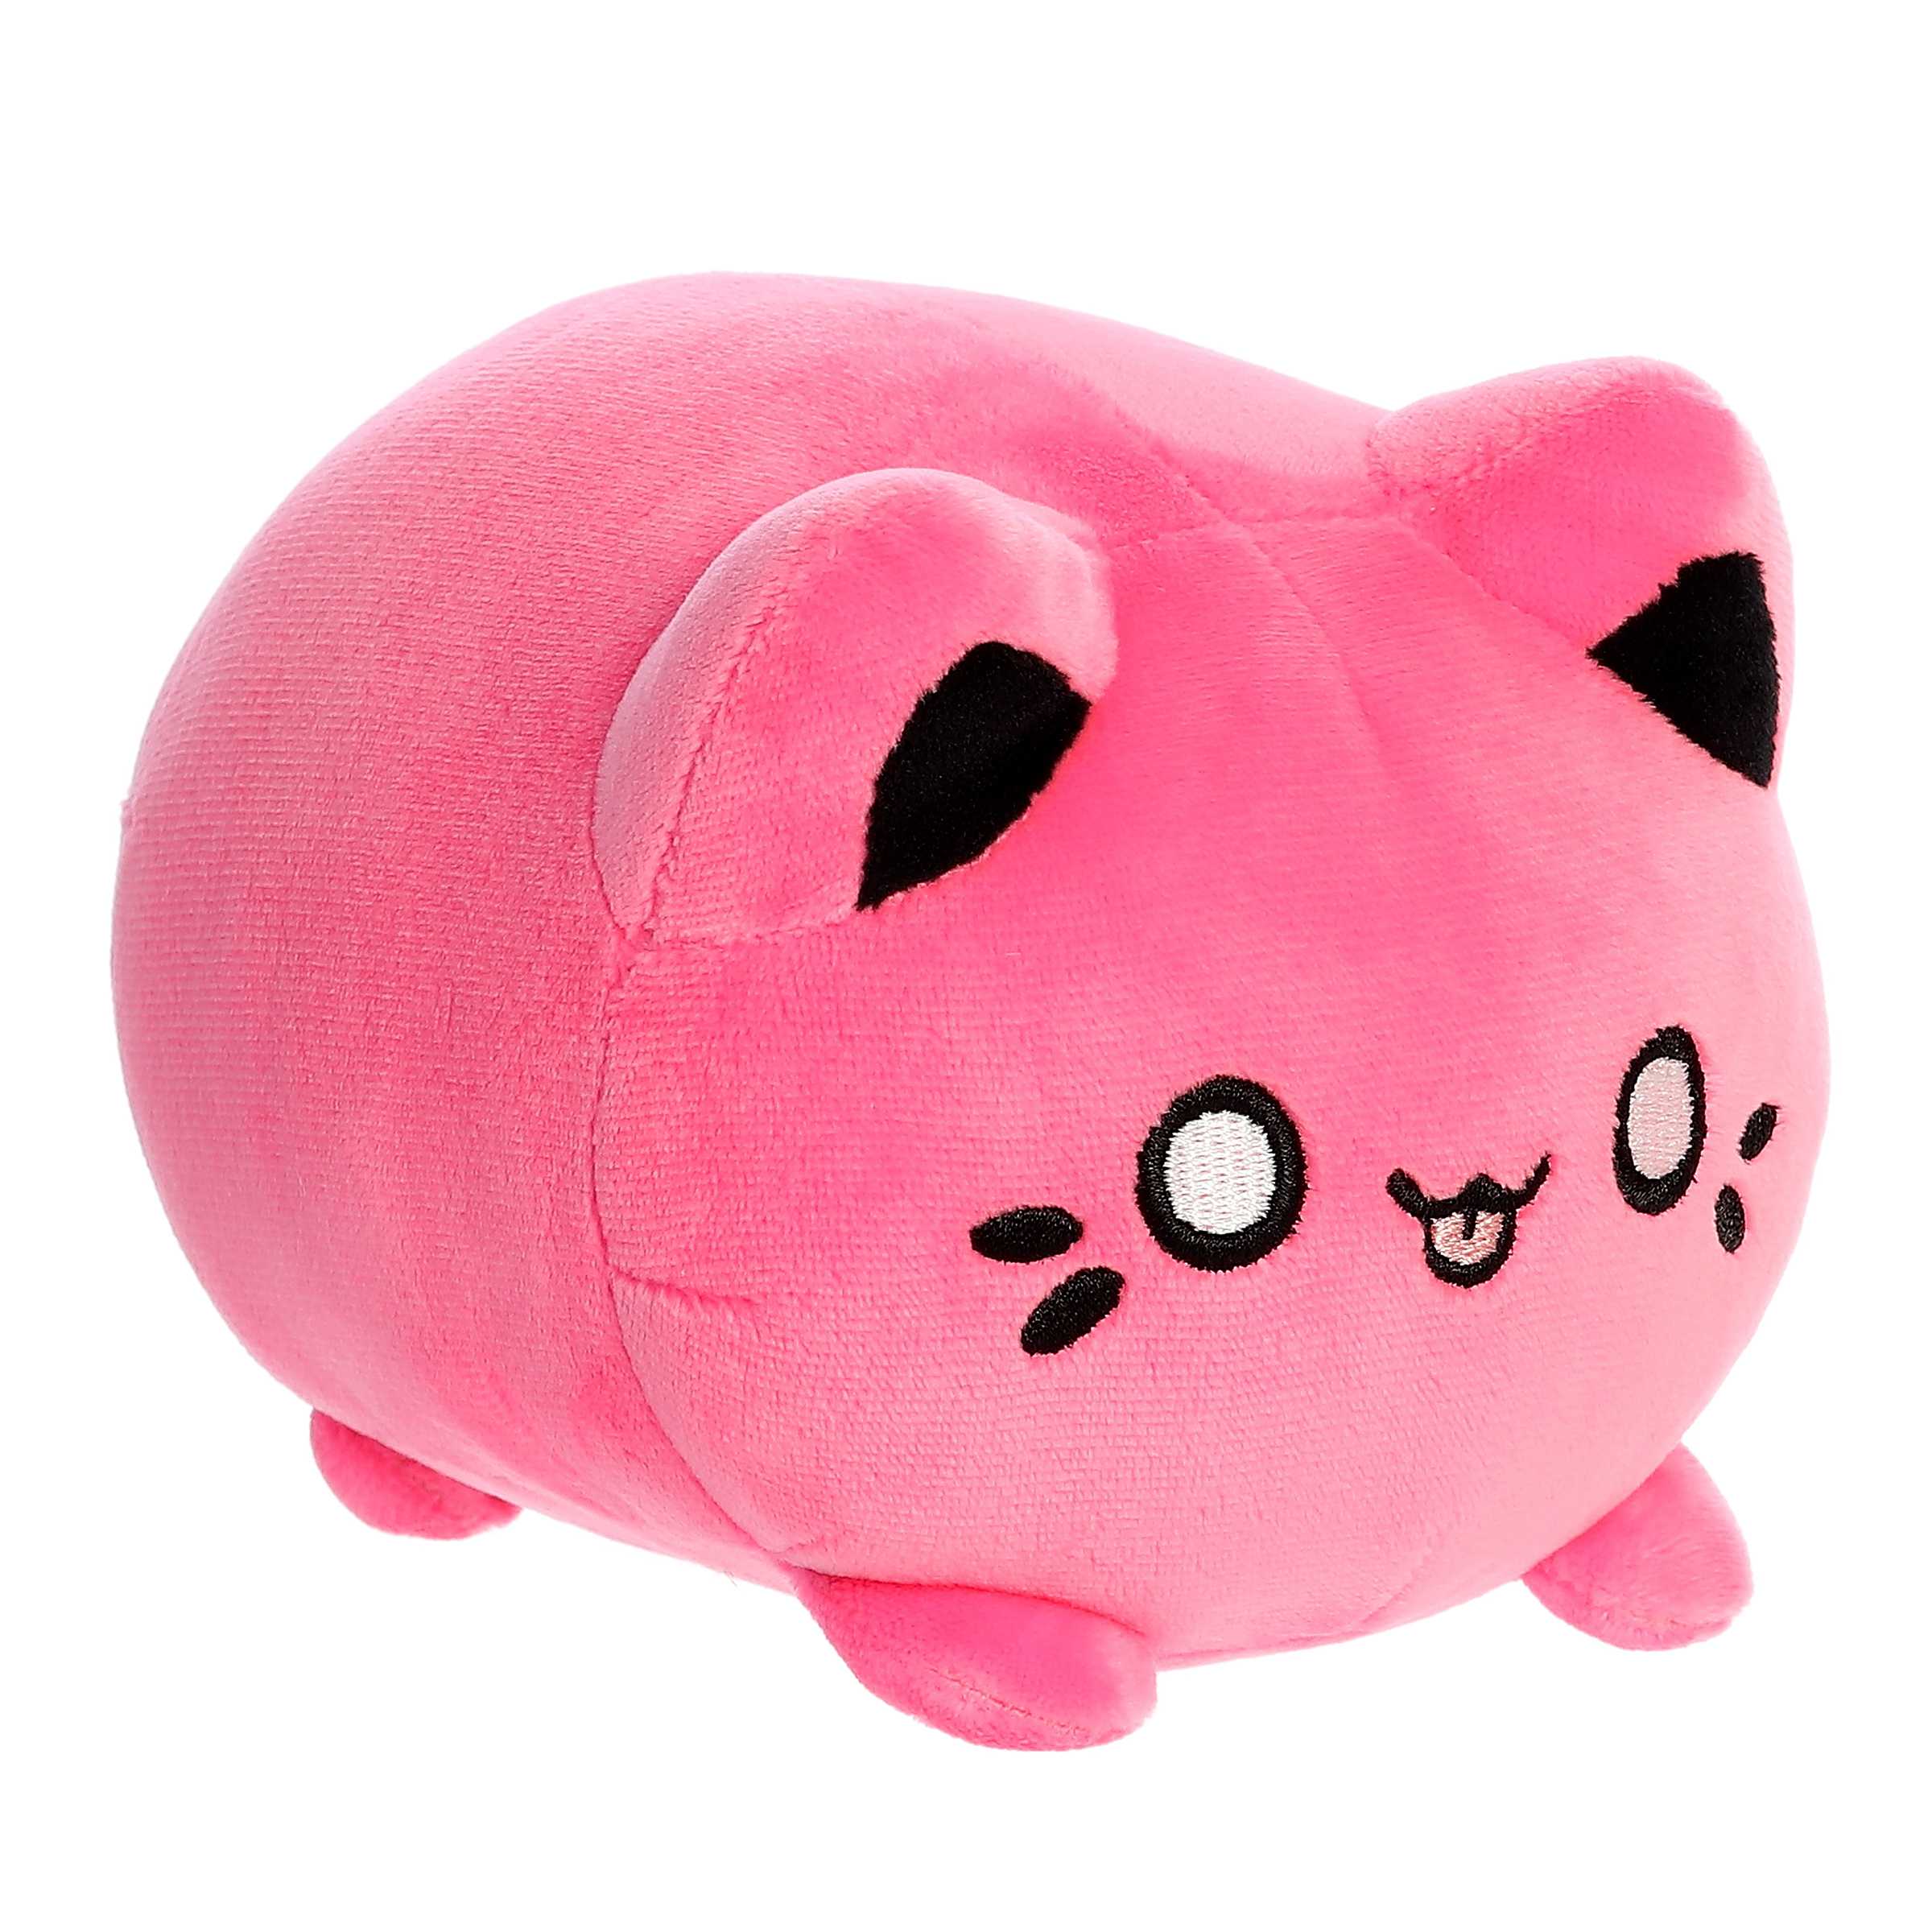 Happy-faced, tongue-out Vivid Pink Meowchi plush by Tasty Peach, radiating playfulness and ready for cuddling.